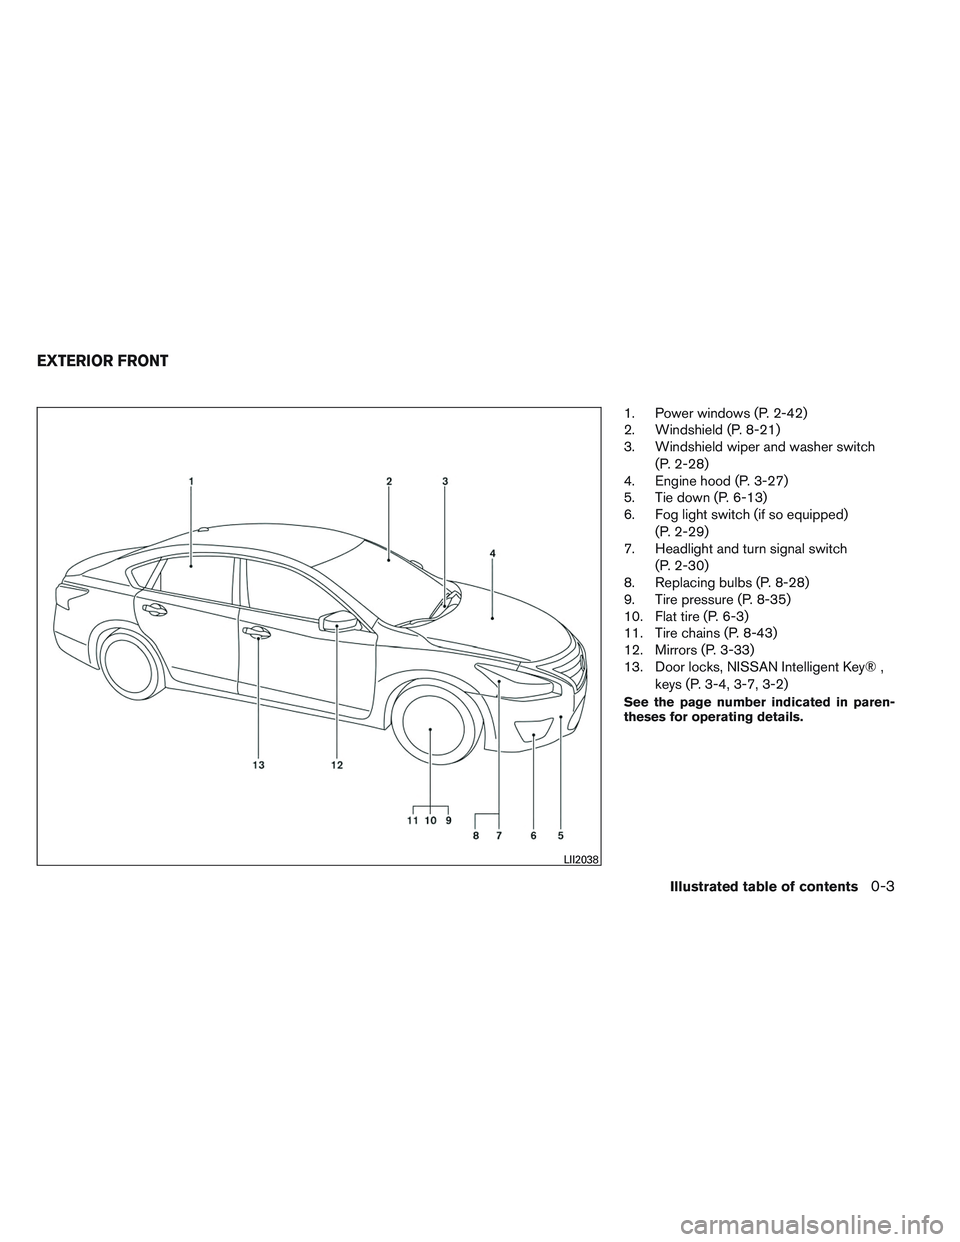 NISSAN ALTIMA SEDAN 2013  Owners Manual 1. Power windows (P. 2-42)
2. Windshield (P. 8-21)
3. Windshield wiper and washer switch(P. 2-28)
4. Engine hood (P. 3-27)
5. Tie down (P. 6-13)
6. Fog light switch (if so equipped)
(P. 2-29)
7. Headl